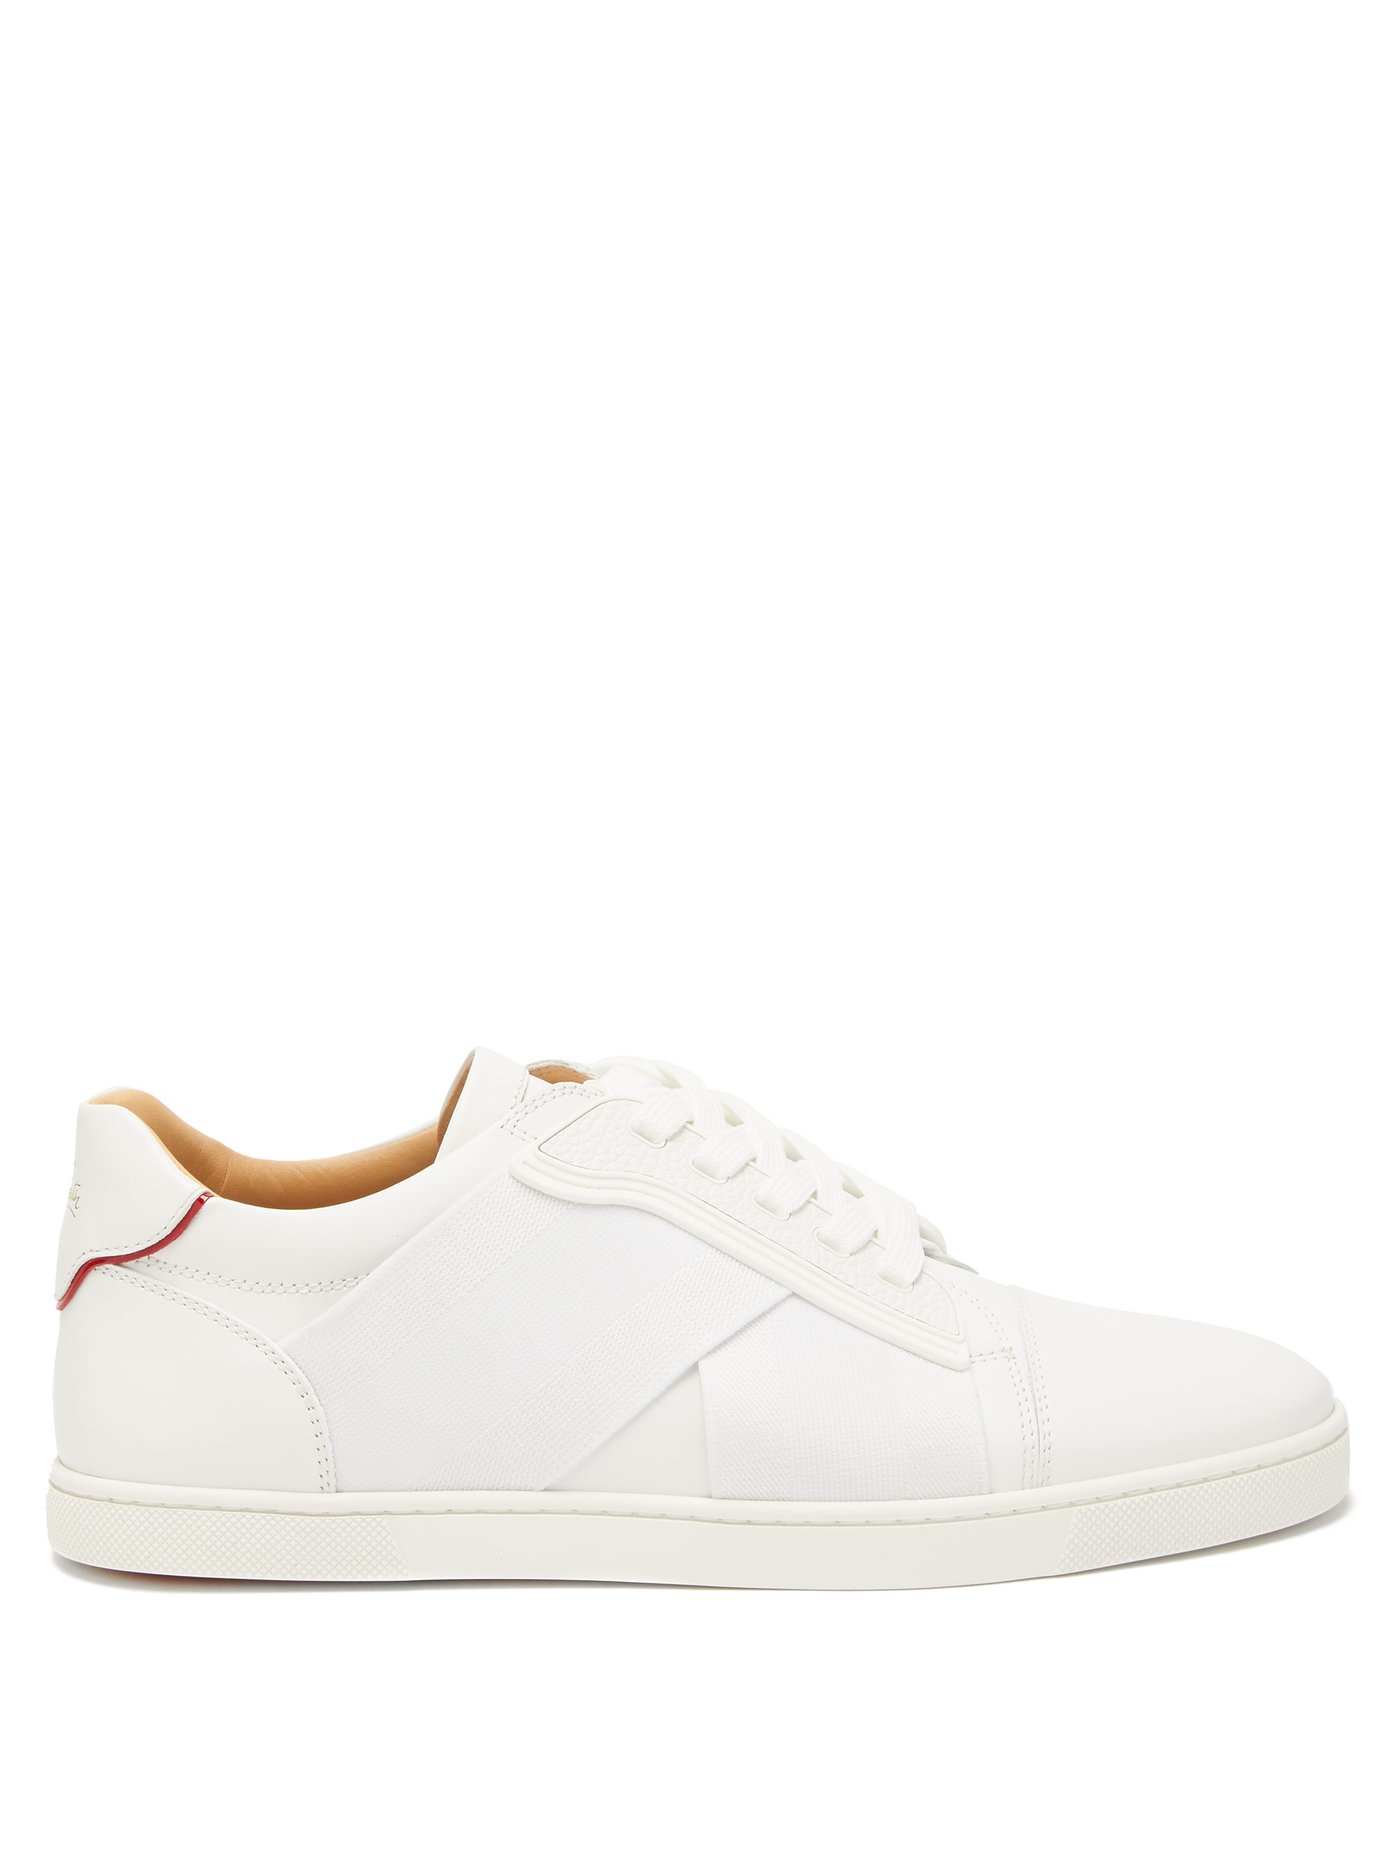 christian louboutin sneakers donna